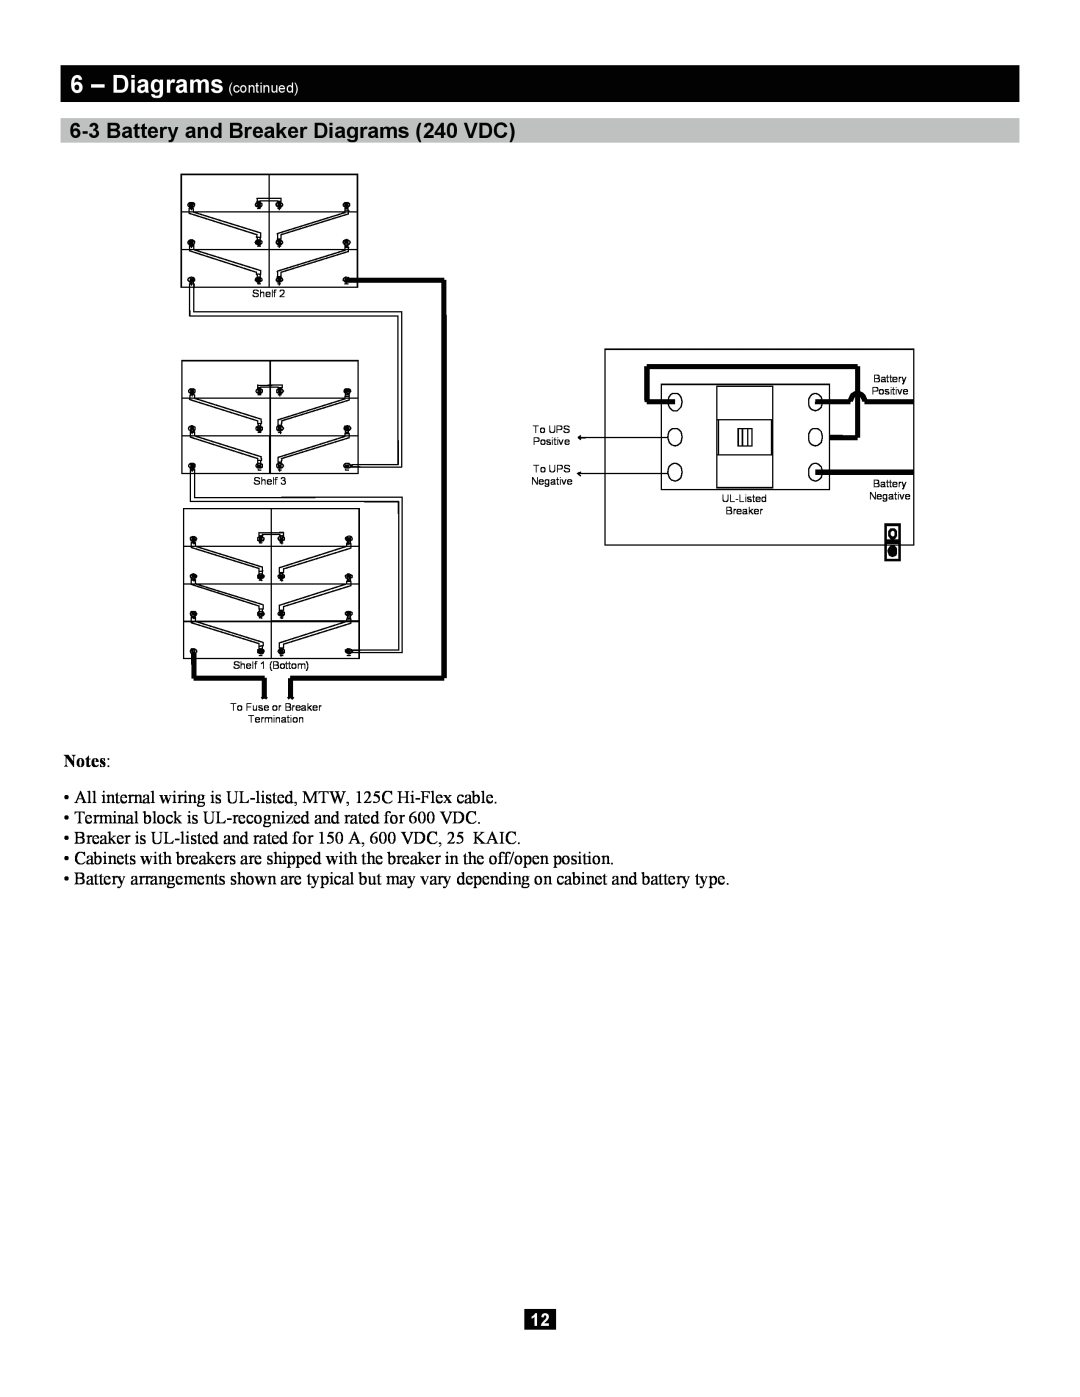 Tripp Lite Extended-Run 3-Phase Battery Cabinet owner manual Battery and Breaker Diagrams 240 VDC, Diagrams continued 